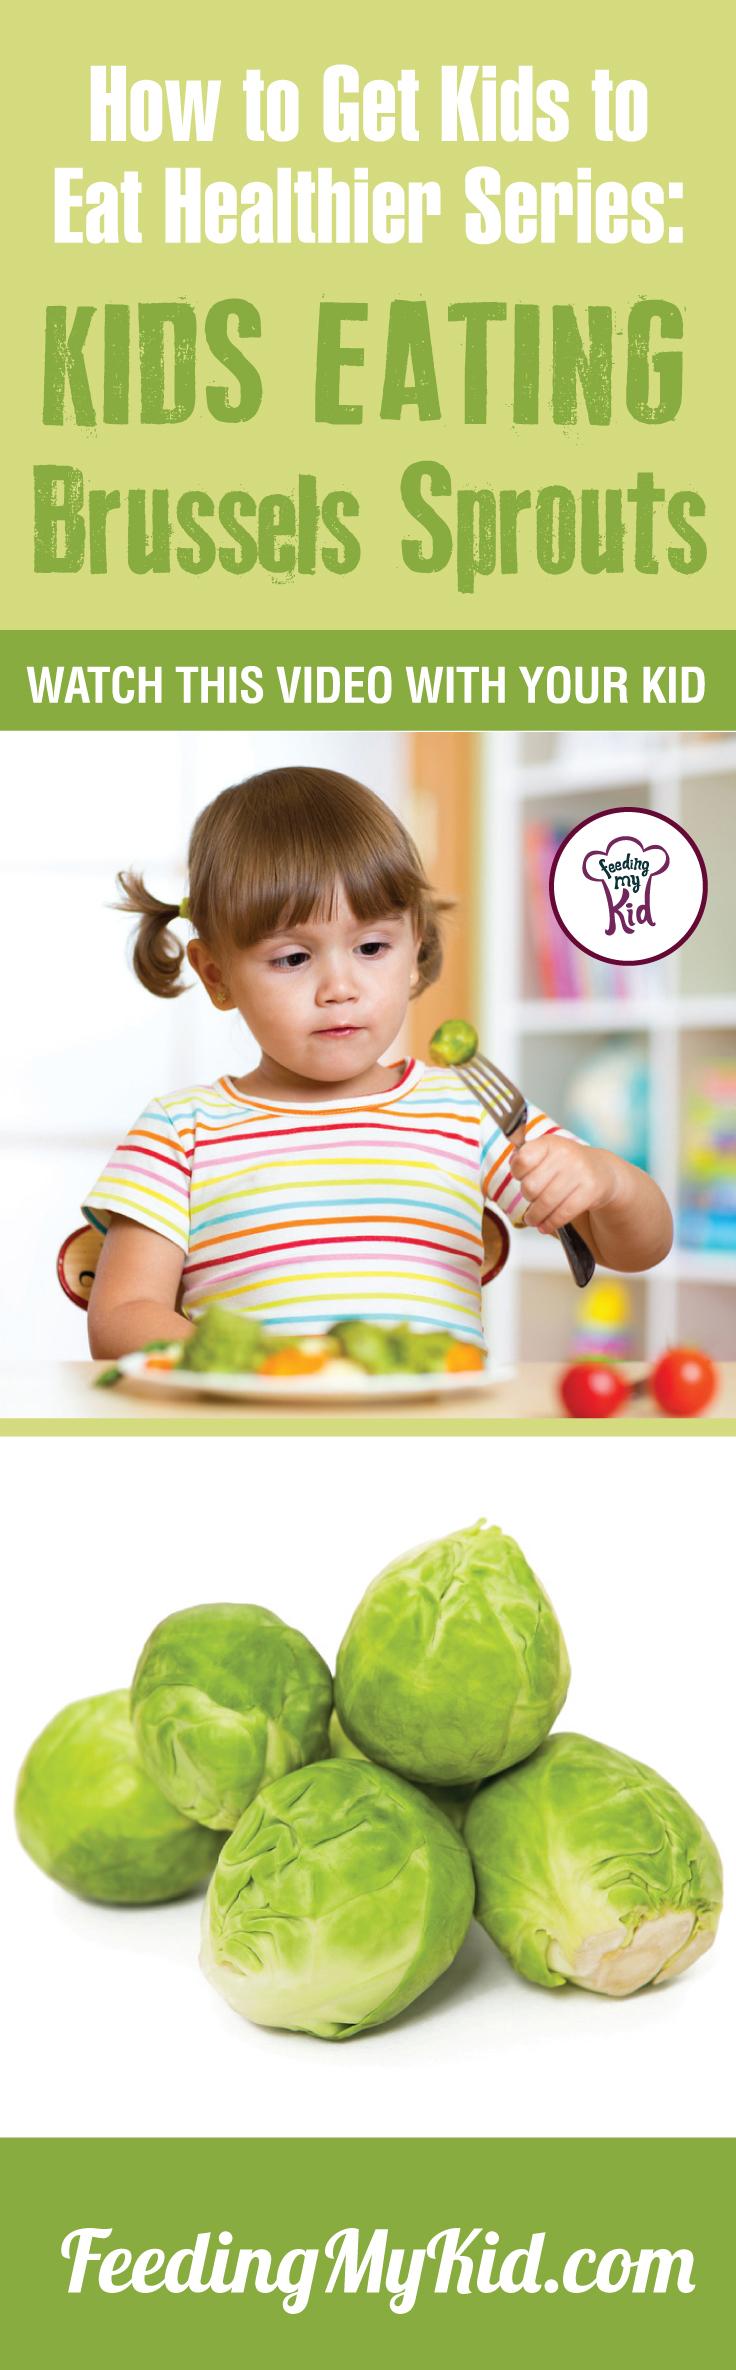 This is a must pin! Want your kids to eat kale? Teach your kids how to eat more vegetables and fruits. Watch these videos with your kids of kids eating veggies and fruits and get your kids to eat veggies and fruits. Find out how it works here. Feeding My Kid is a filled with all the information you need about how to raise your kids, from healthy tips to nutritious recipes. #pickyeating #getkidstoeat #kale